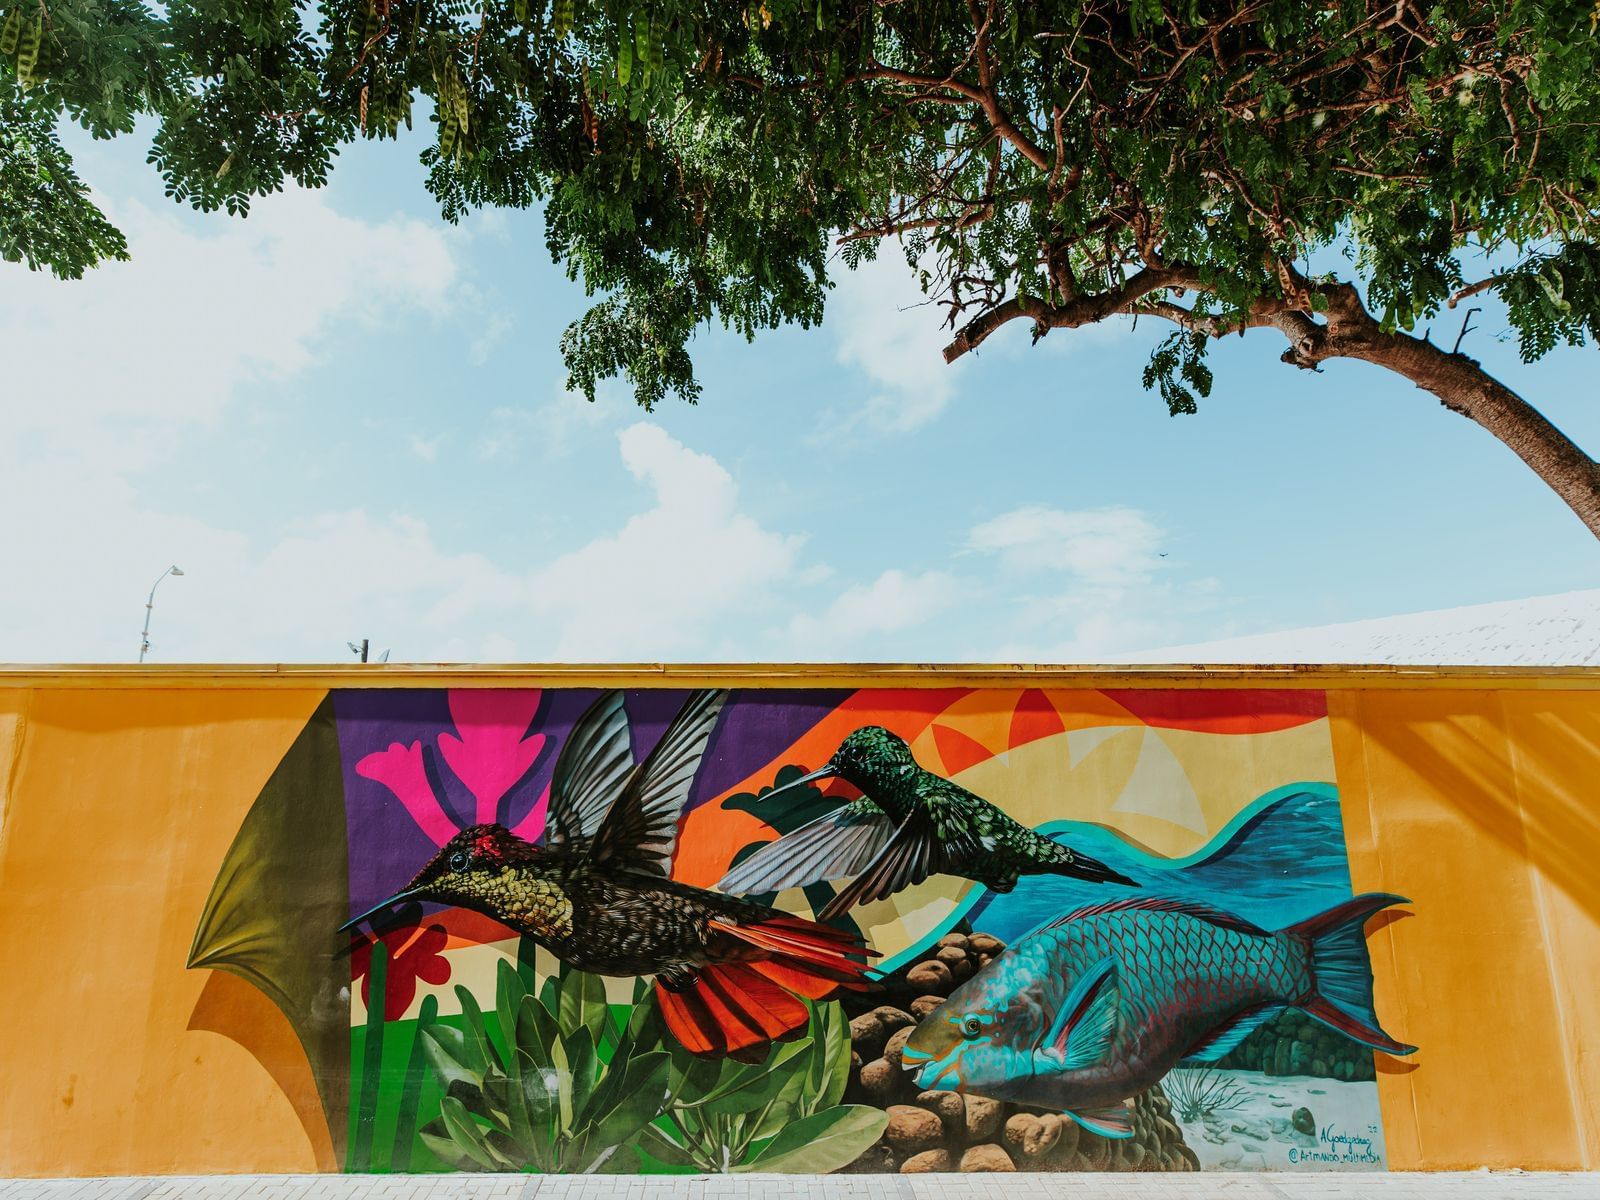 Aruba wall murals to take pictures near Passions on the Beach